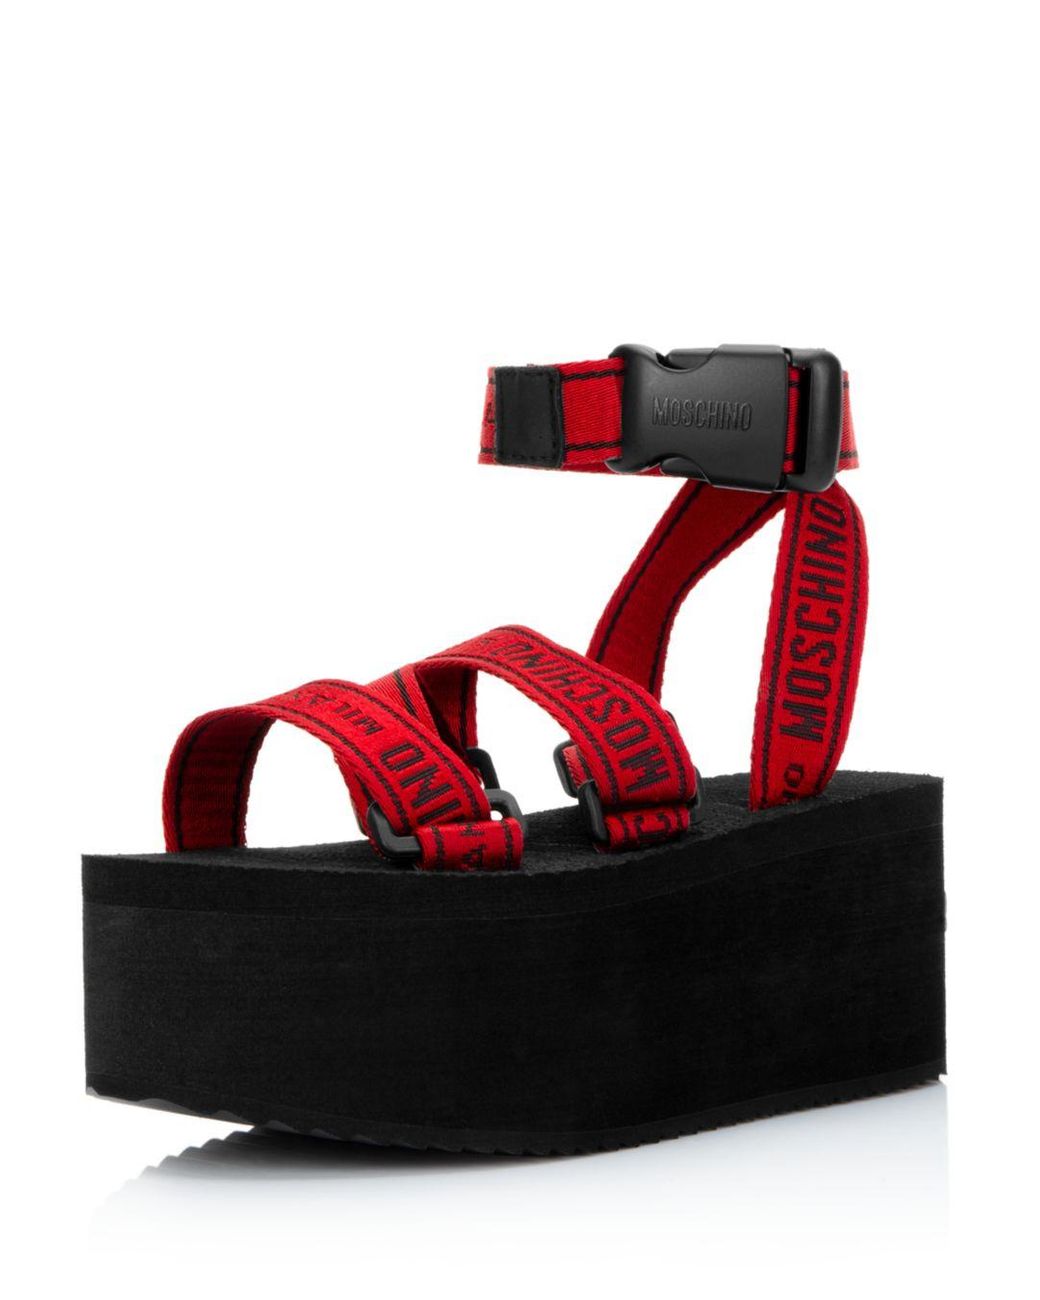 Moschino Synthetic Logo Sporty Platform Sandals in Red | Lyst